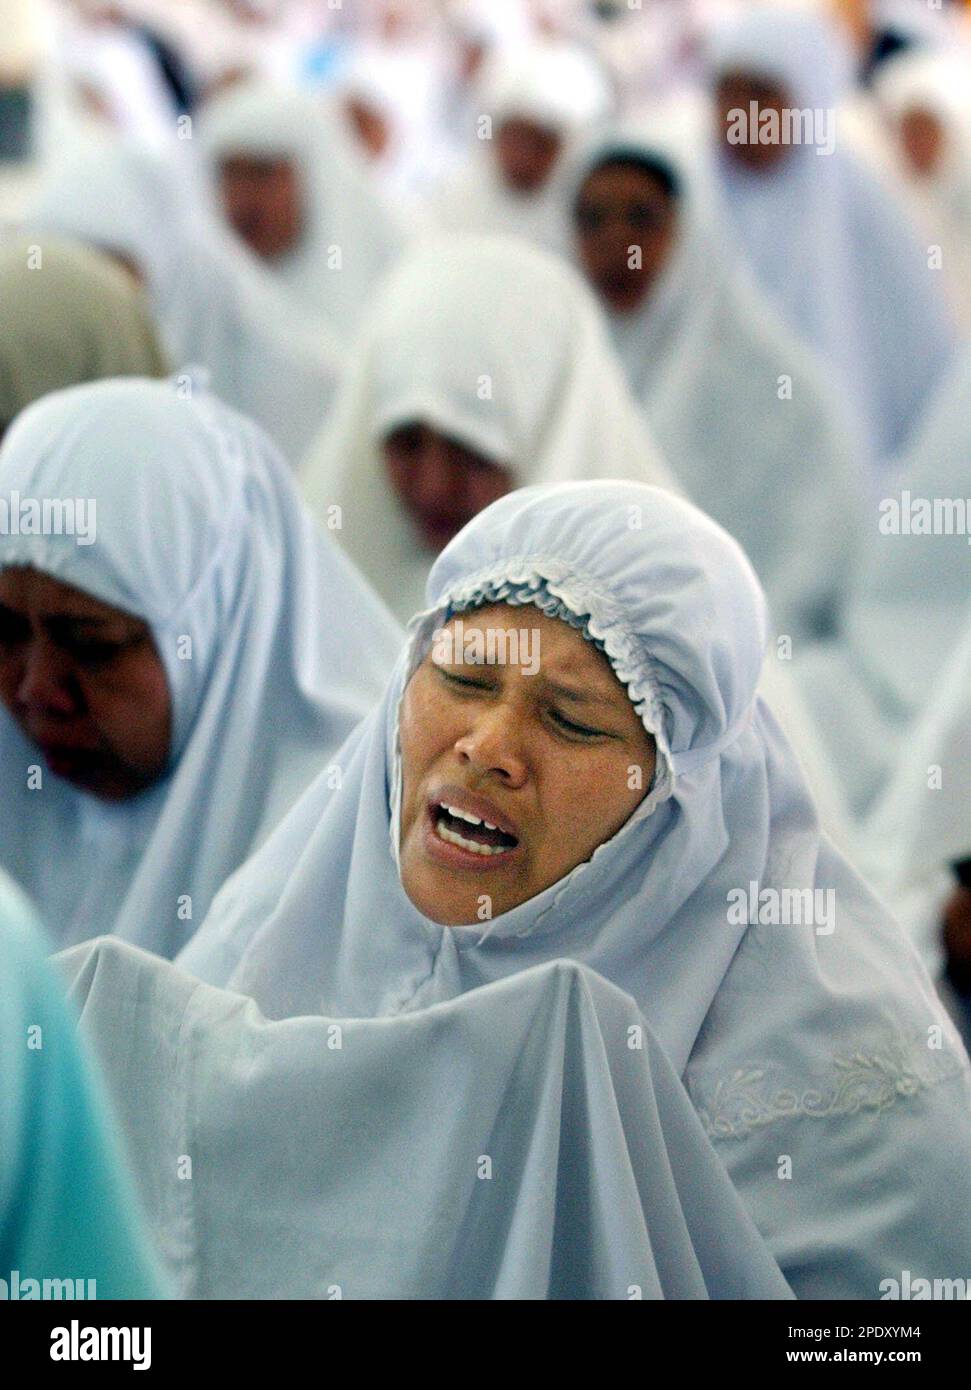 An Acehnese woman cries during a special mass prayer for peace at Baiturahman mosque in Banda Aceh, Indonesia, Monday, Aug. 15, 2005. People in Aceh were hopeful that an accord being signed Monday in Finland would bring lasting peace to their tsunami-ravaged province, but after three decades of fighting fear and distrust run deep. (AP Photo/ Achmad Ibrahim) Stock Photo